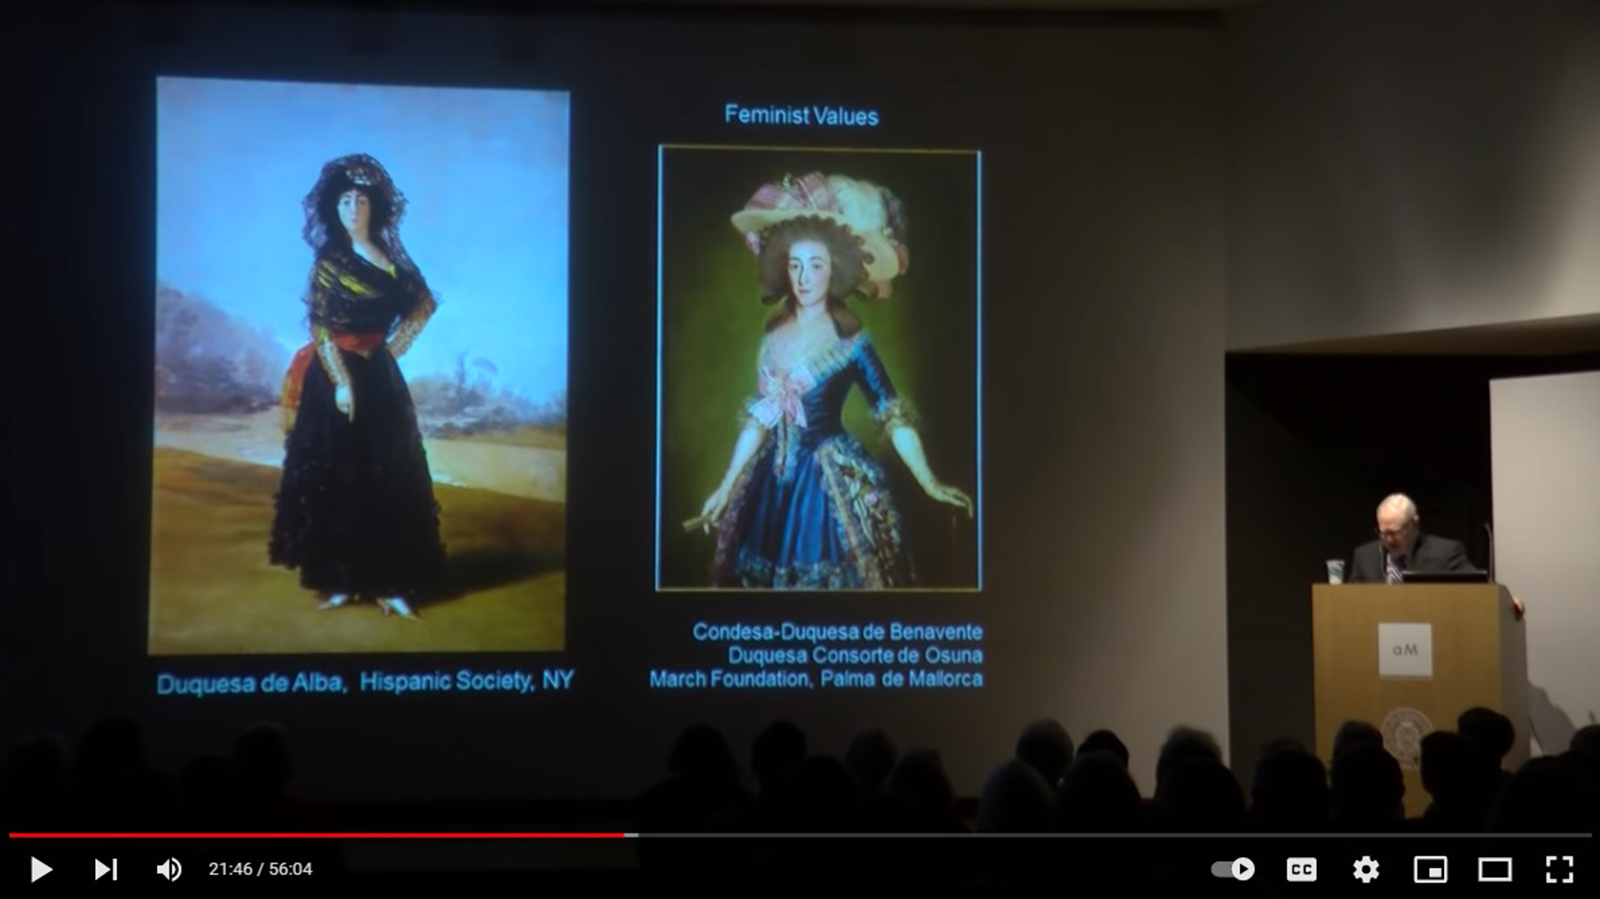 WATCH More than Goya’s Muse, the Duchess of Alba